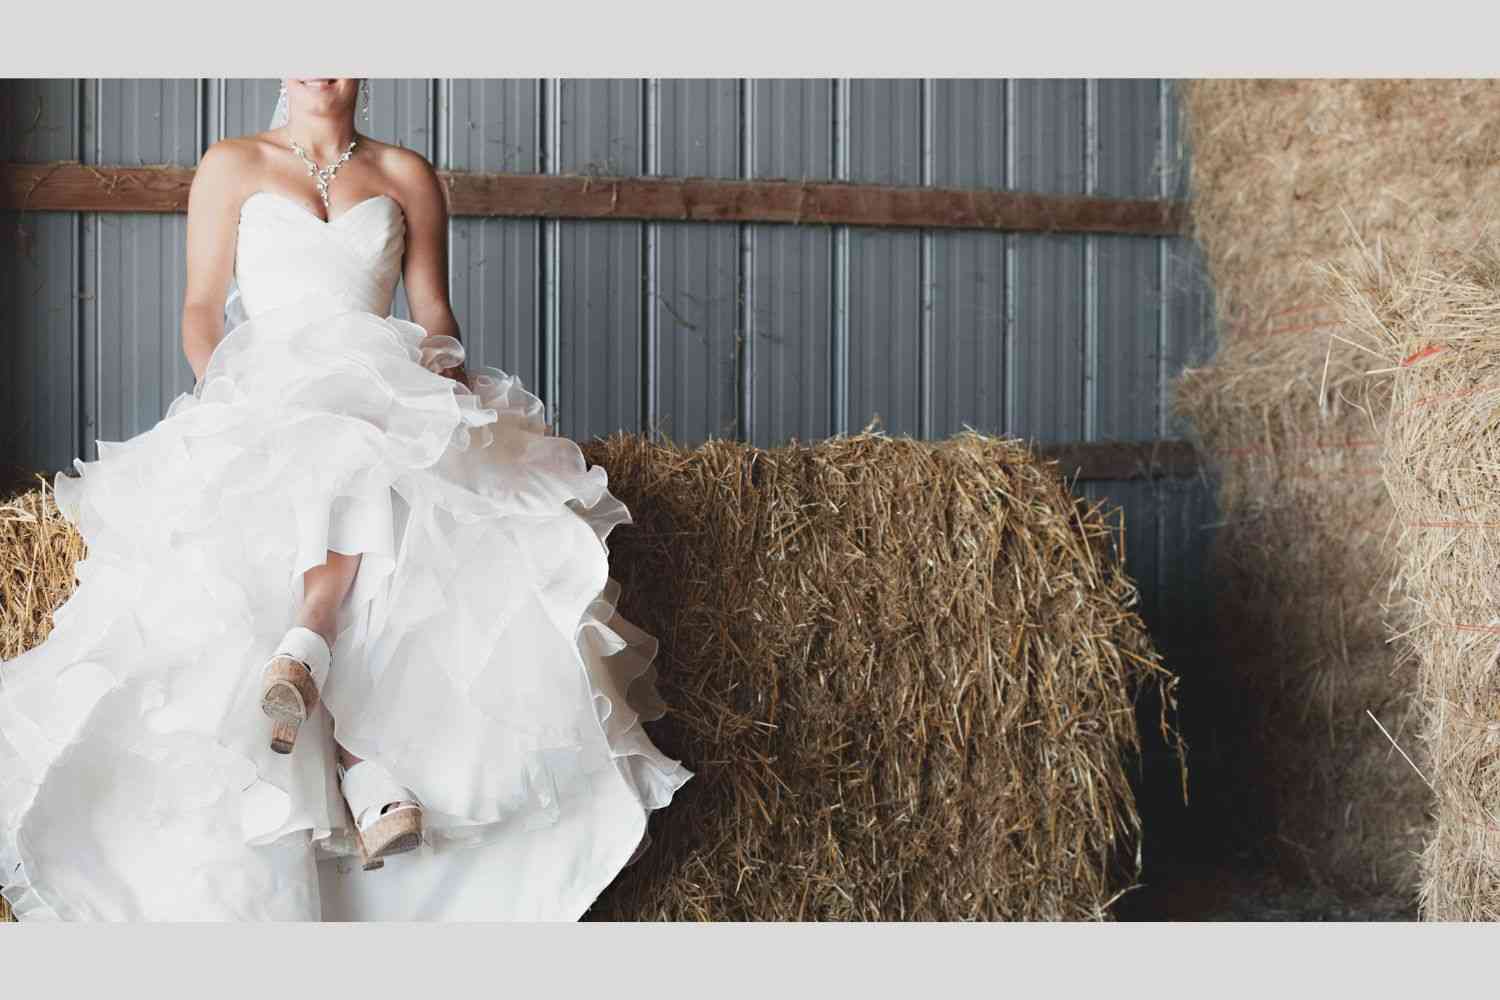 woman sits on hay bale